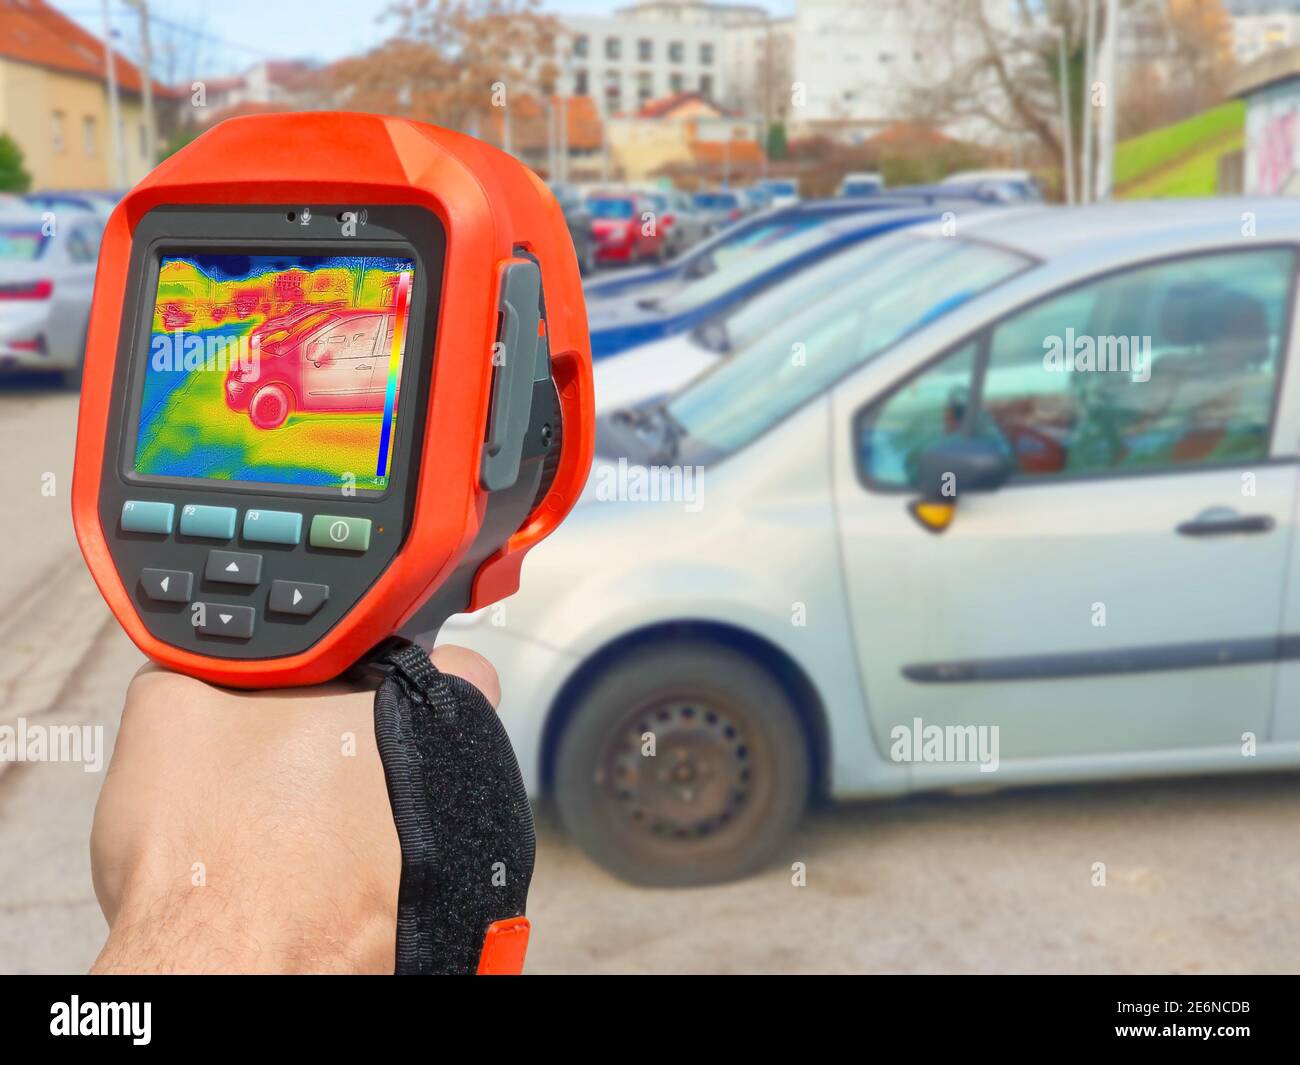 Recording with thermal camera showing parked cars at town parking a lot of Stock Photo